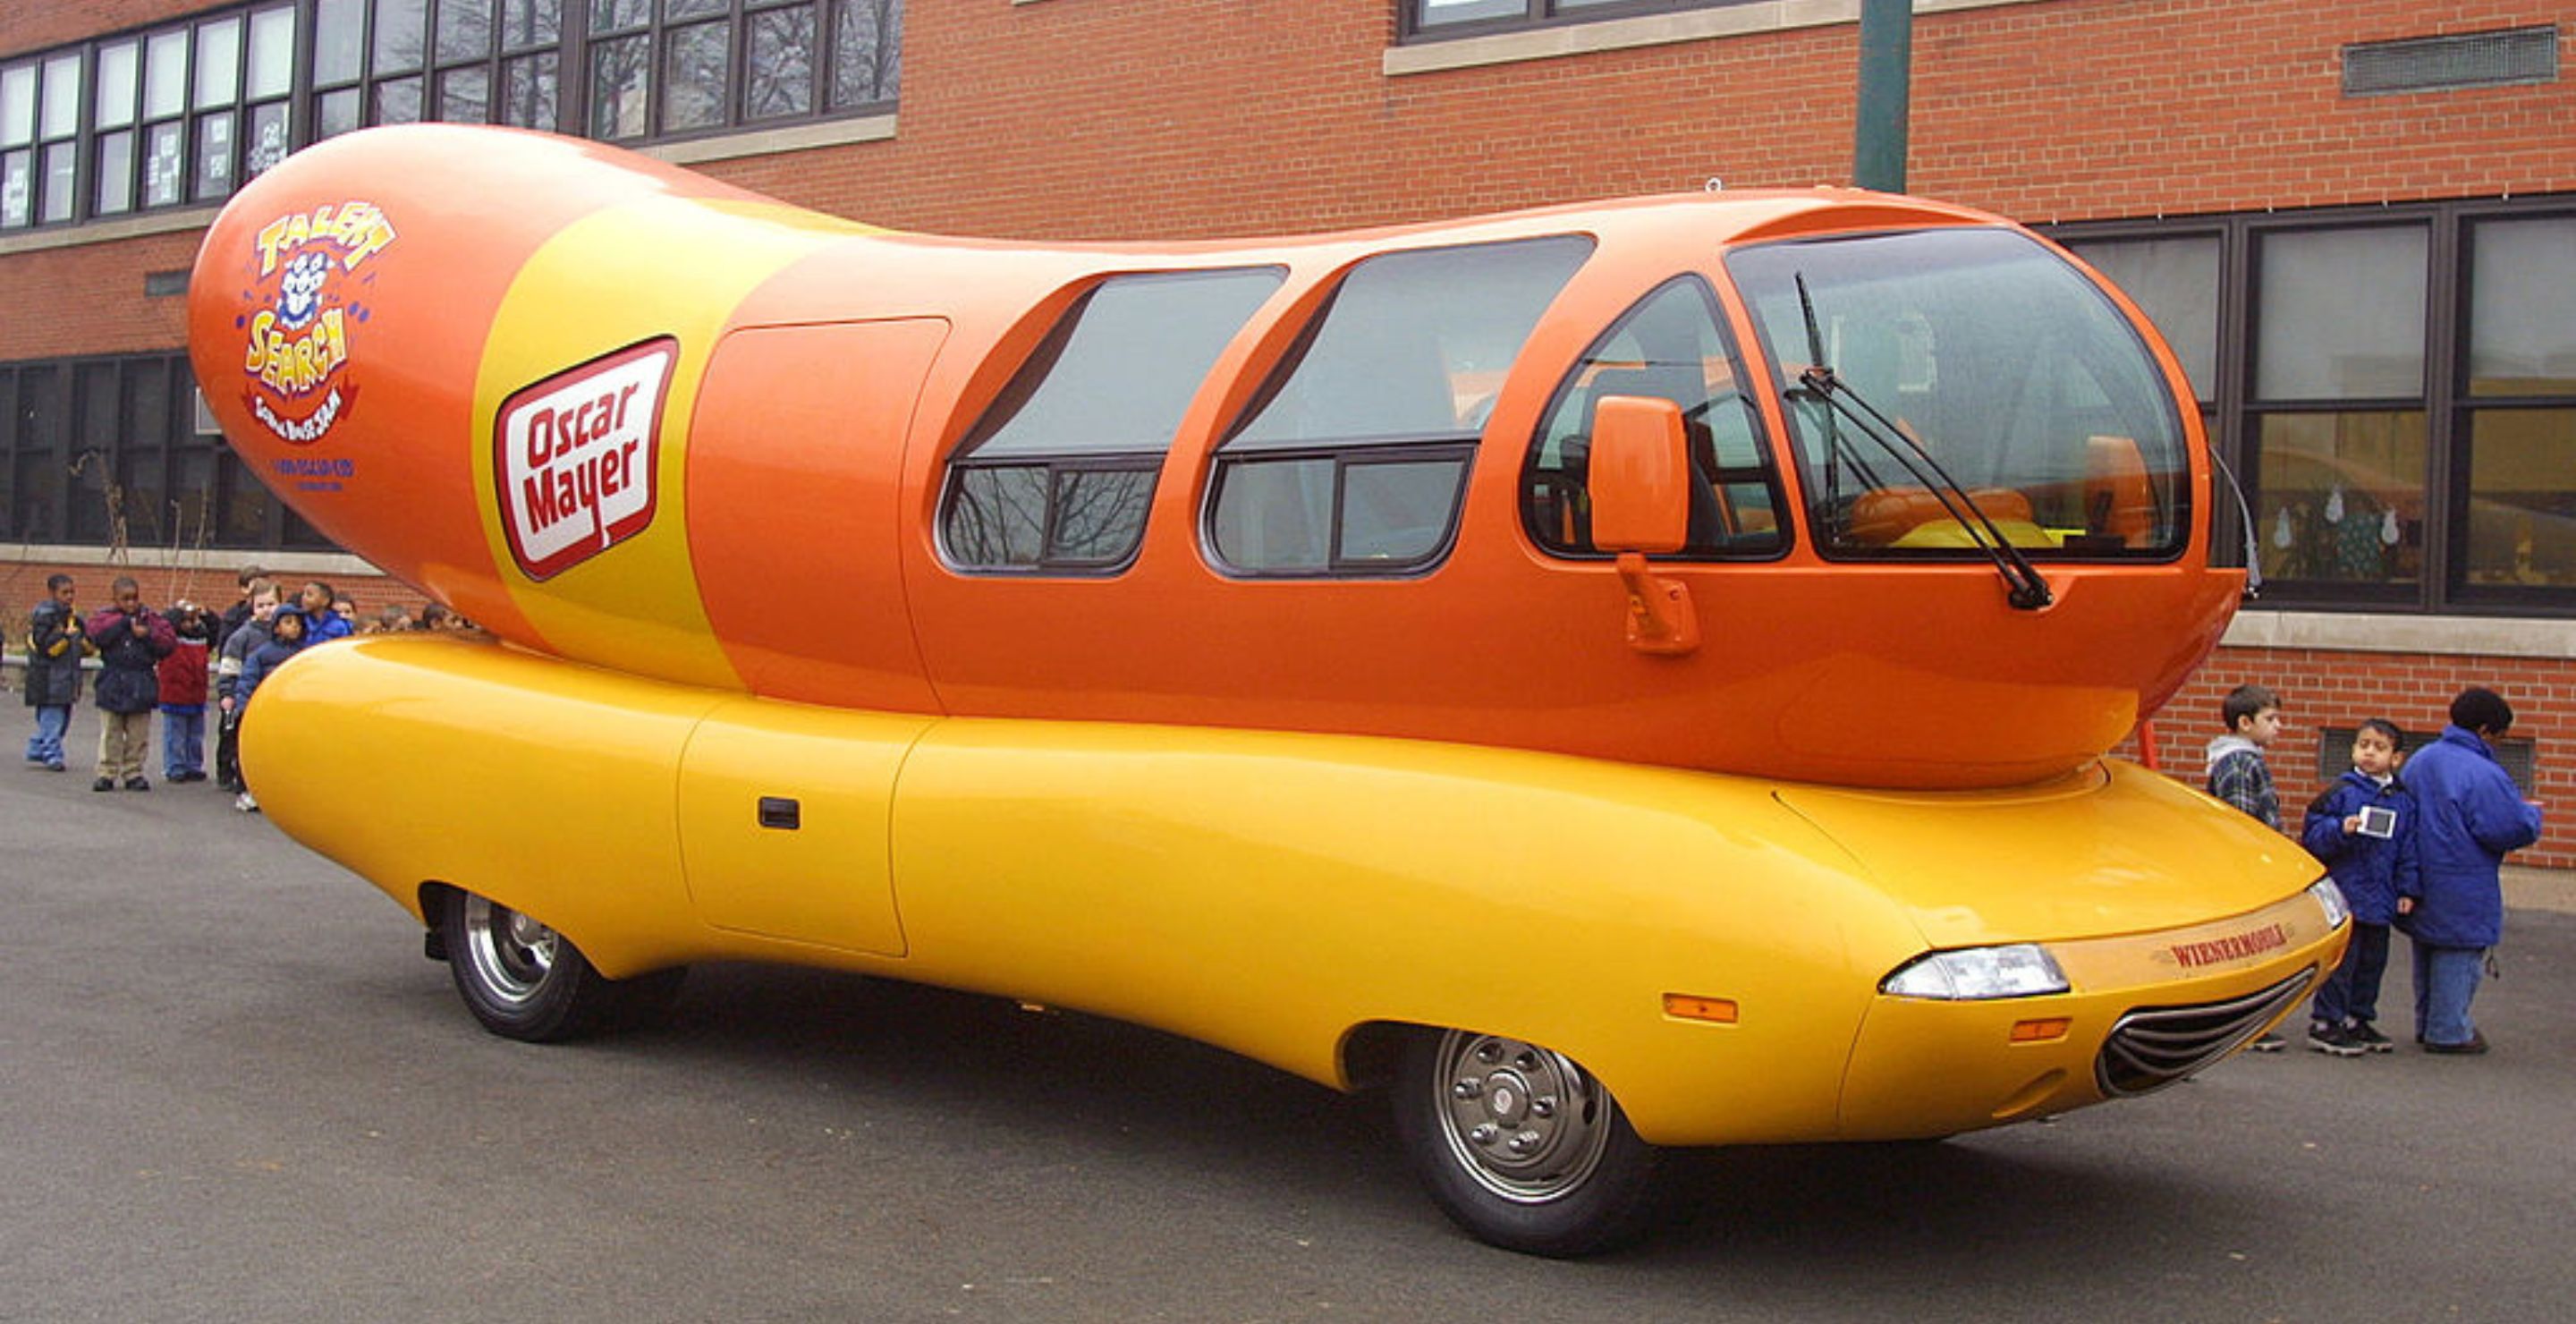 Oscar Mayer Wienermobile Gets Into Rollover Wreck, Proving Old Dogs Can Learn New Tricks